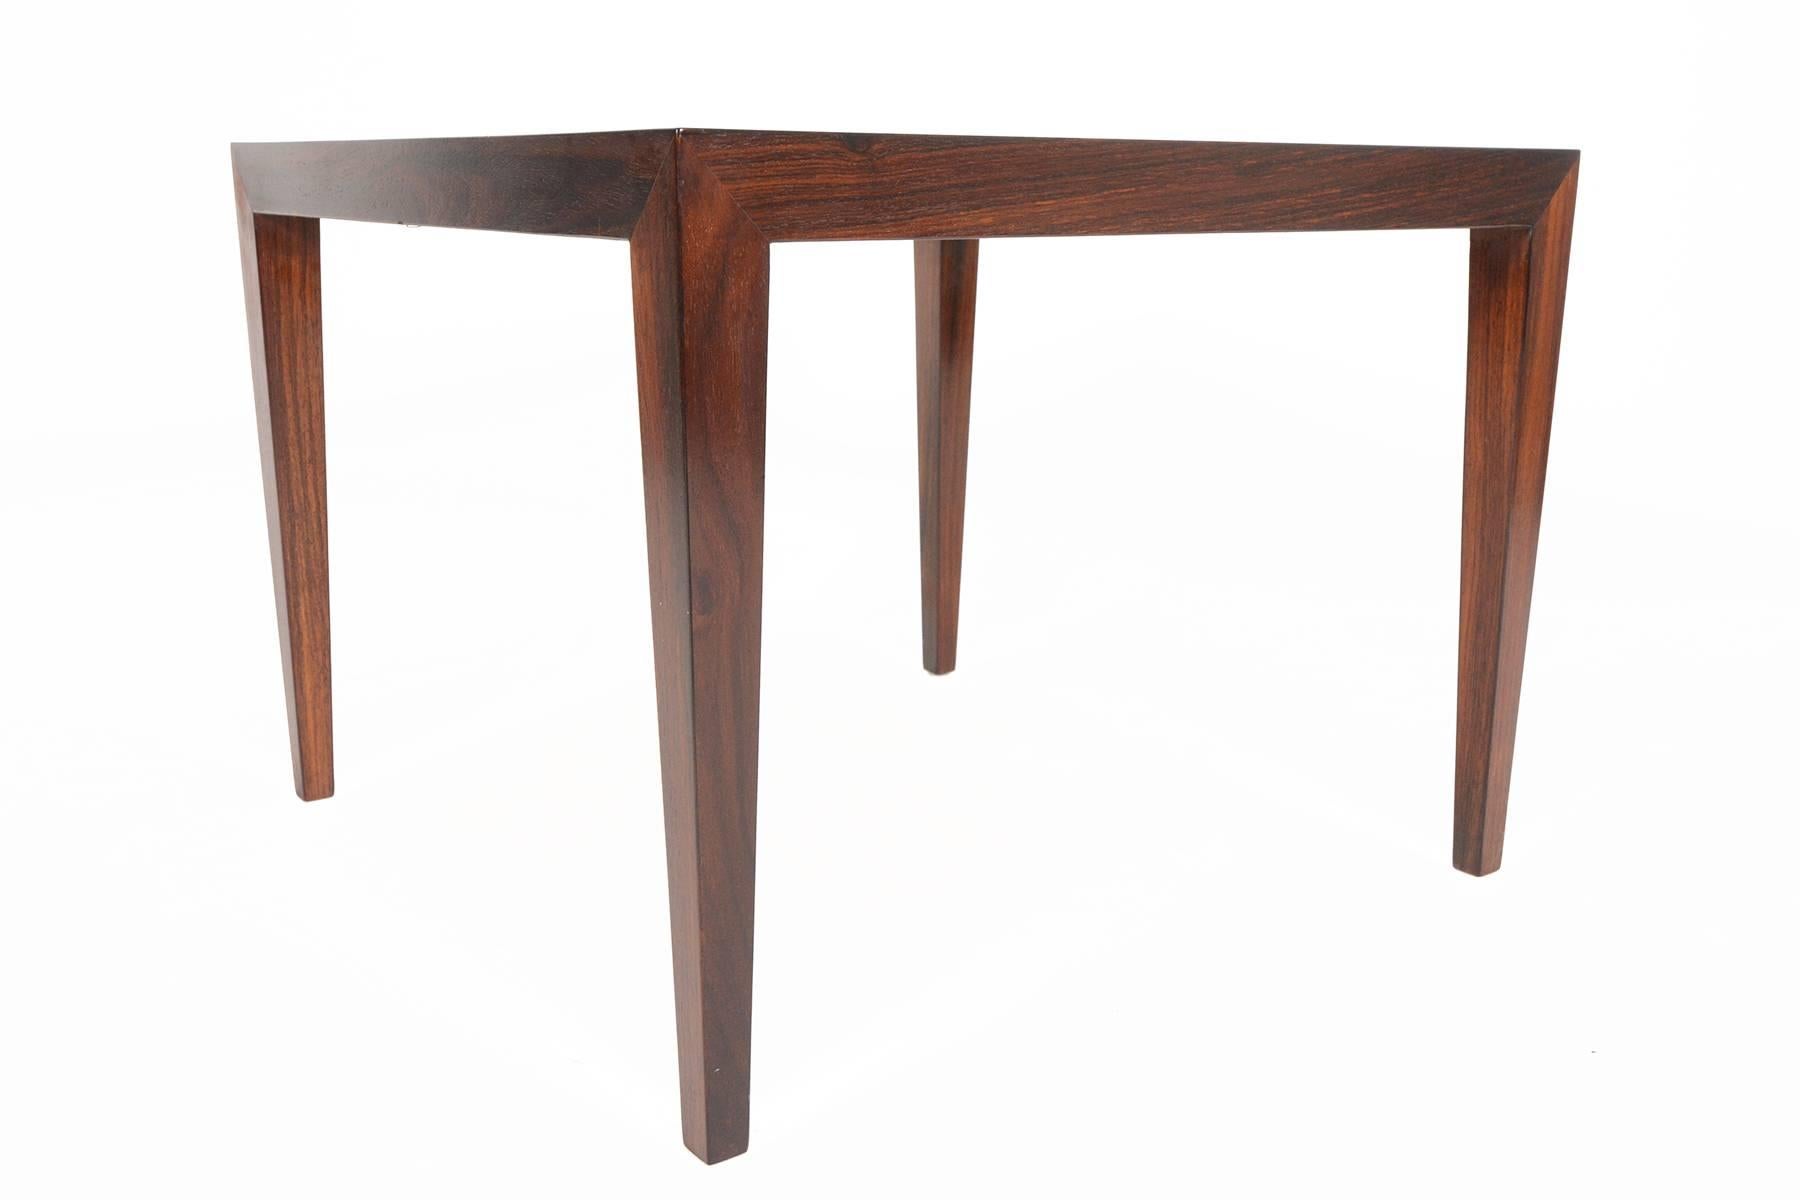 This Danish modern Mid-Century coffee table in rosewood was designed by Severin Hansen for Haslev Mobelsnedkeri in the 1960s. This simple piece features excellent joinery and craftsmanship. In excellent original condition with typical wear for their